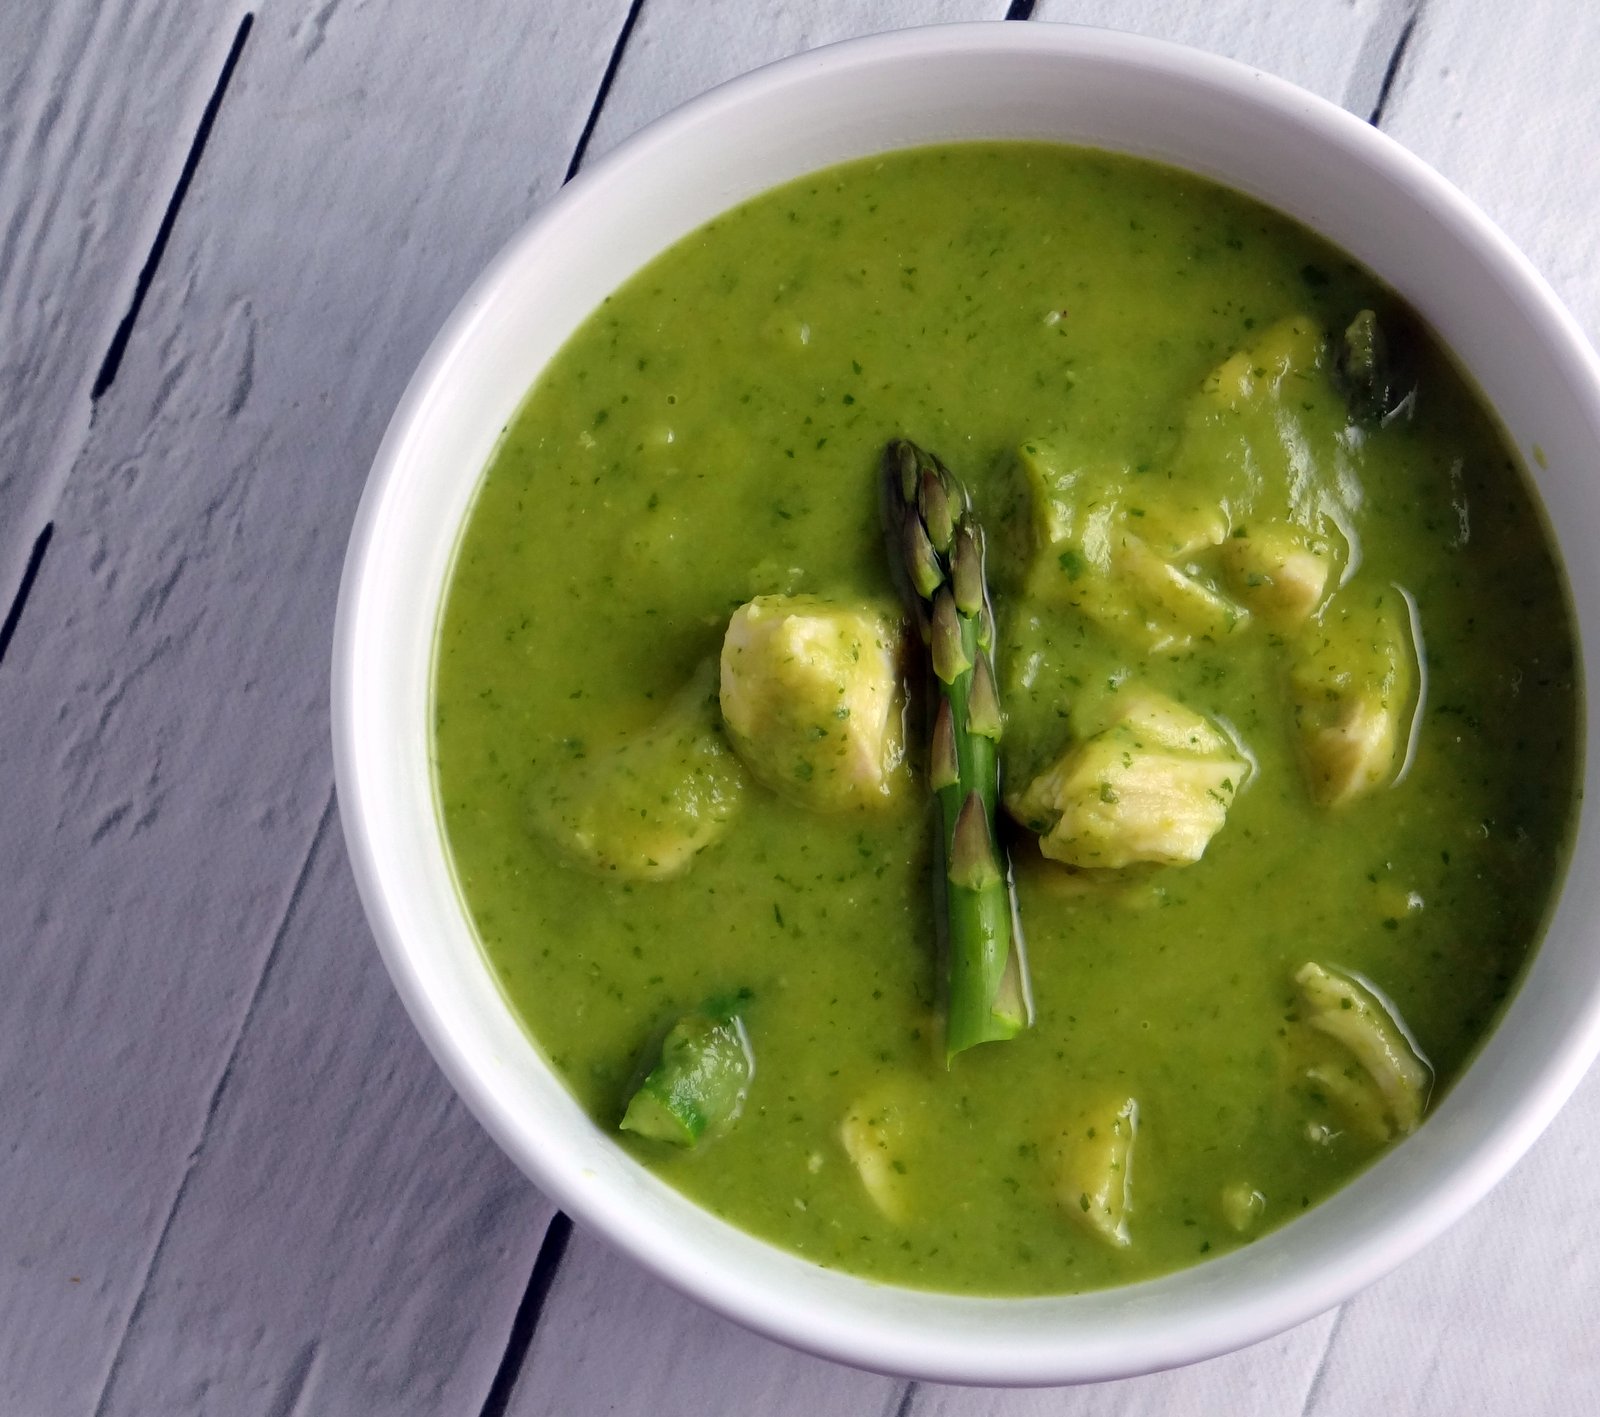 a bowl of creamy, richly green soup with big chunks of chicken and asparagus tips